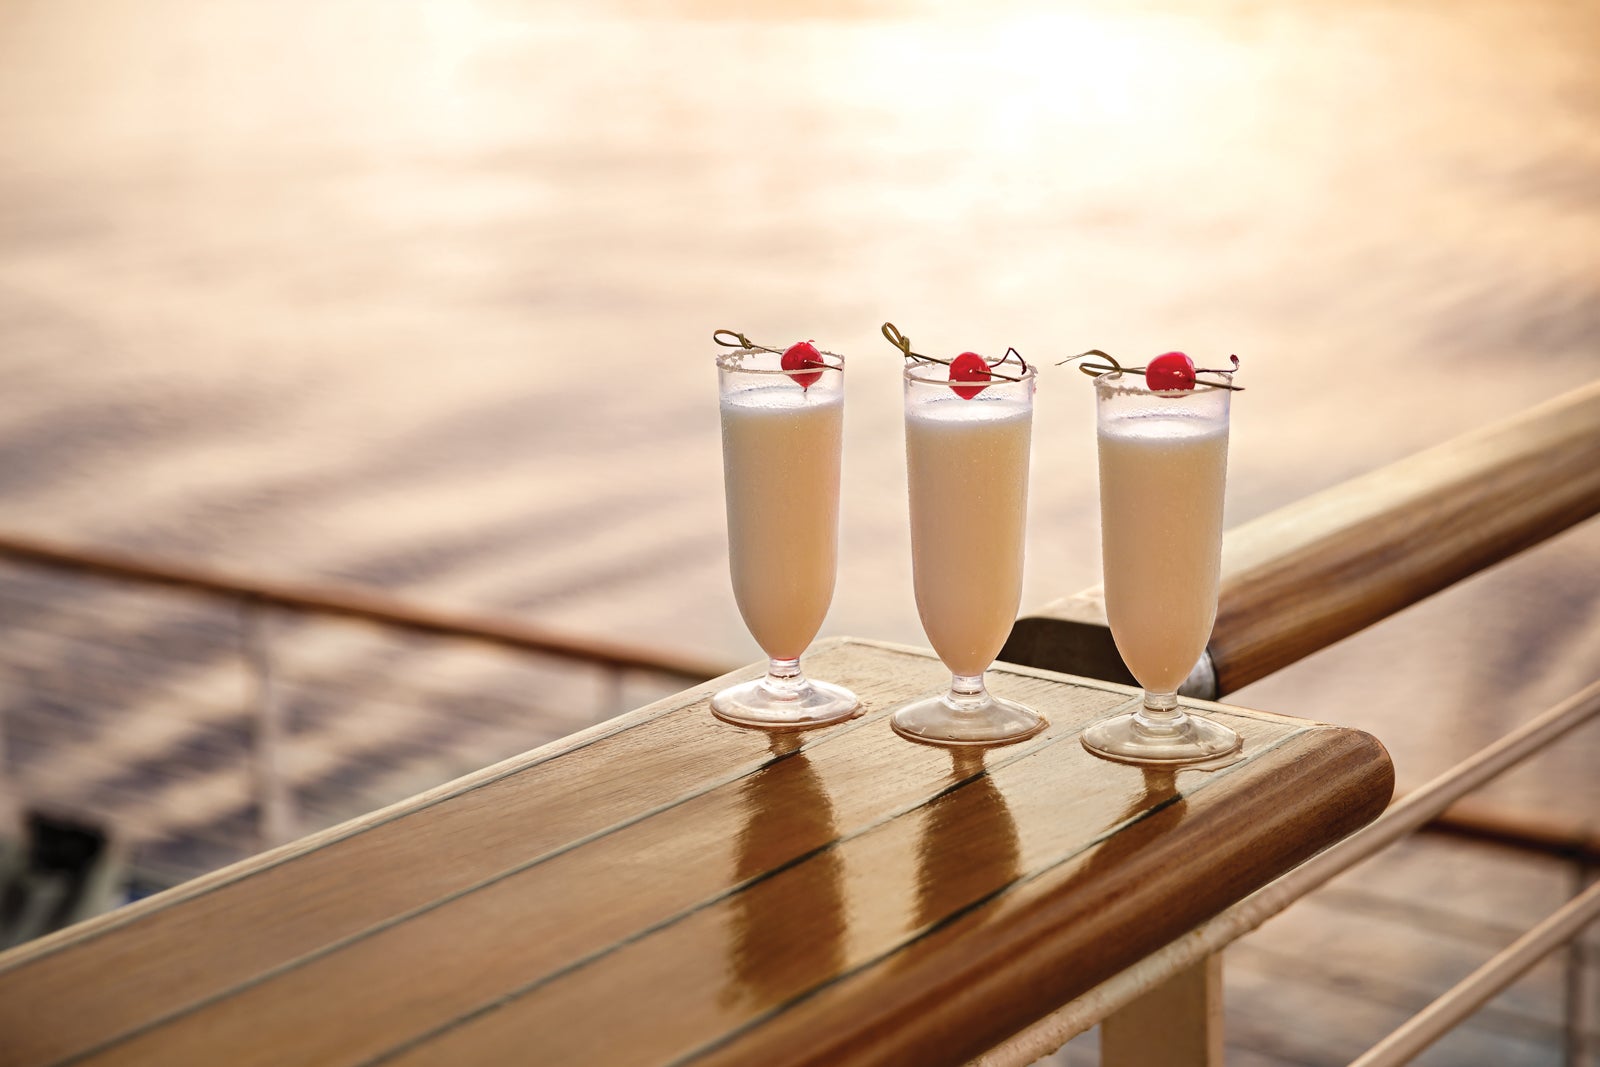 is the princess cruise drink package worth it